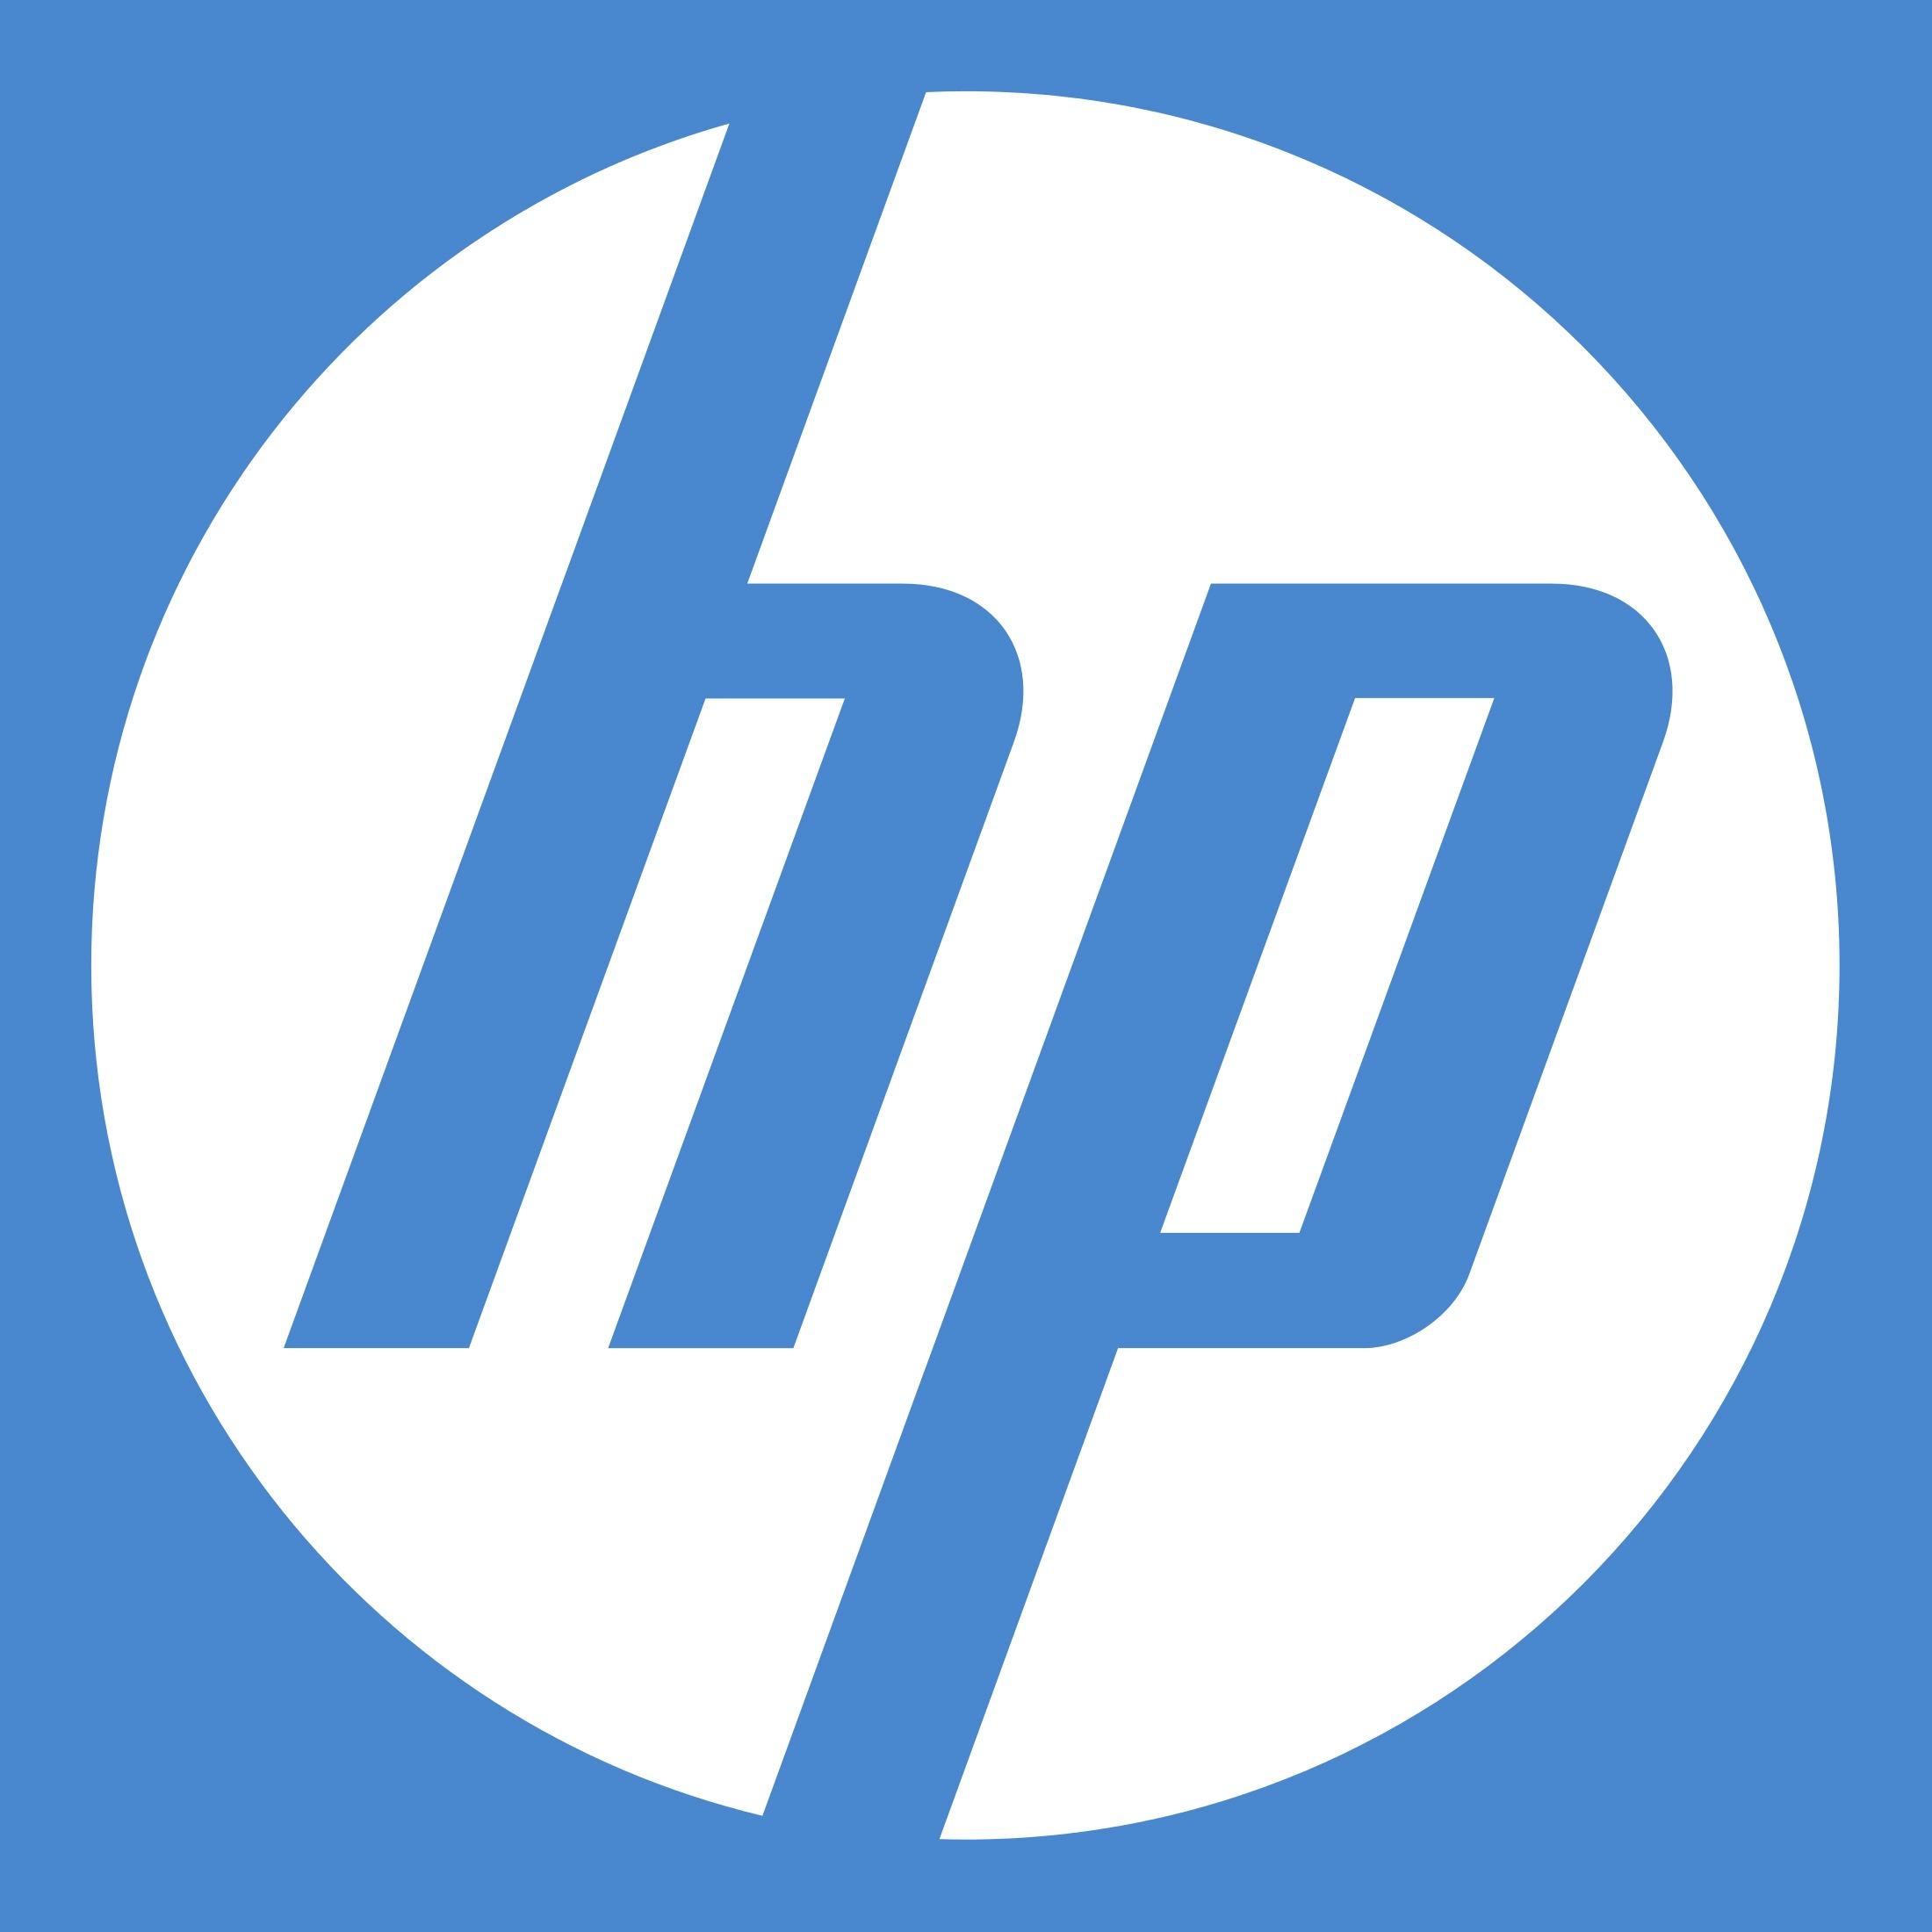 HP Logo - Colors HP Logo For The Blind And Visually Impaired